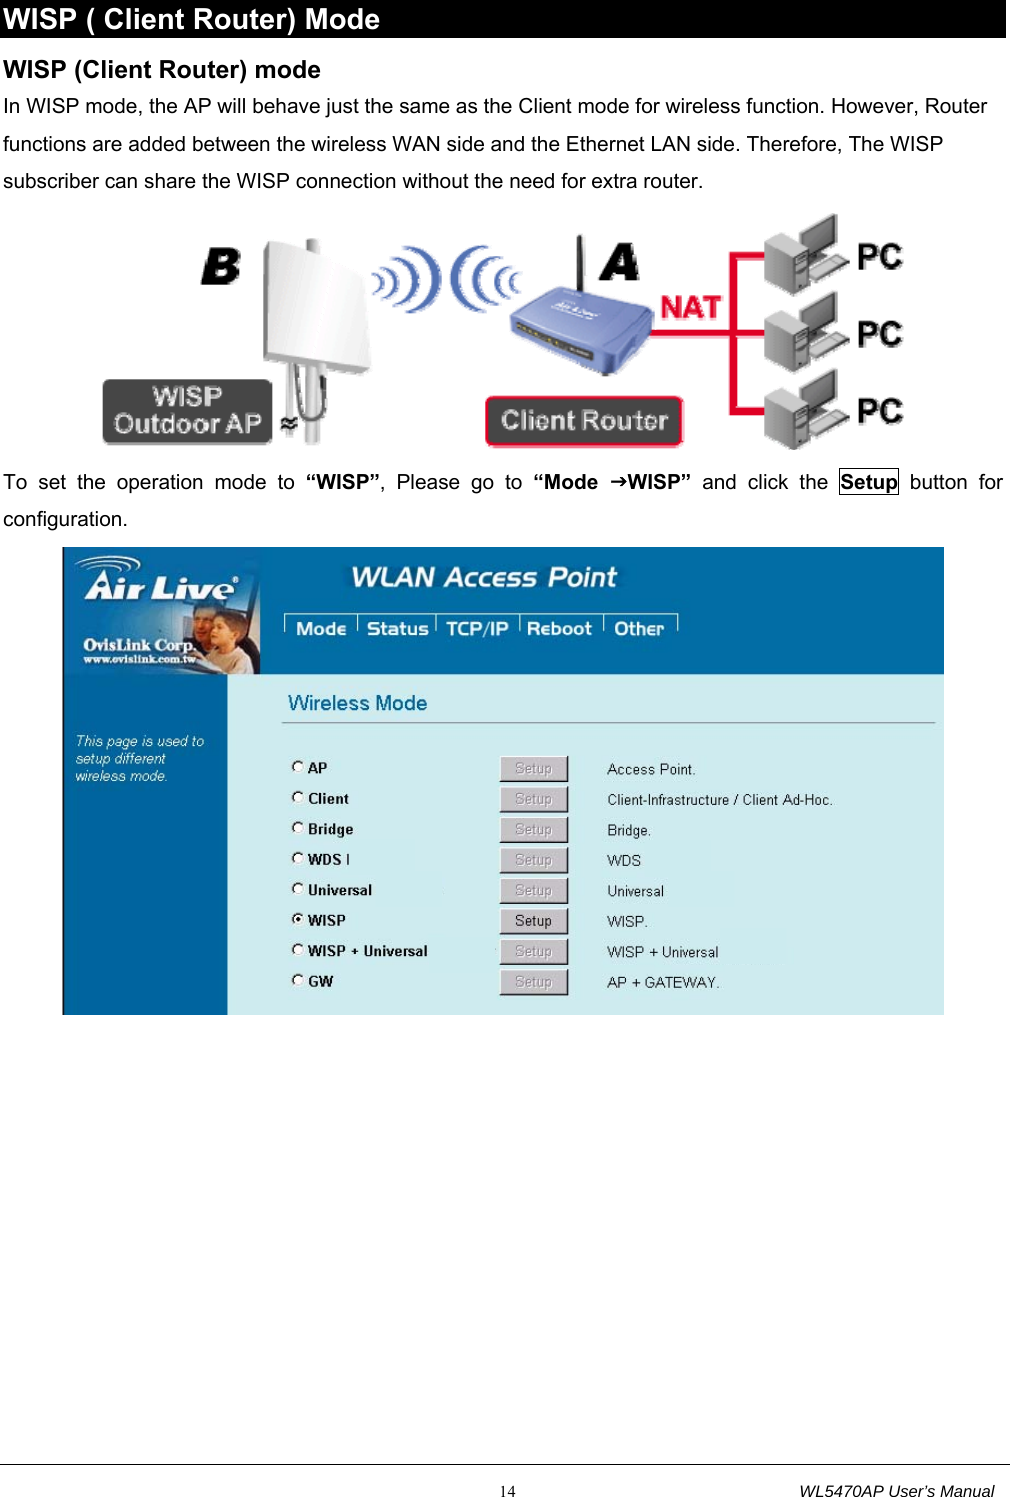                                                           14                                  WL5470AP User’s Manual WISP ( Client Router) Mode WISP (Client Router) mode In WISP mode, the AP will behave just the same as the Client mode for wireless function. However, Router functions are added between the wireless WAN side and the Ethernet LAN side. Therefore, The WISP subscriber can share the WISP connection without the need for extra router.  To set the operation mode to “WISP”, Please go to “Mode  JWISP” and click the Setup button for configuration.  